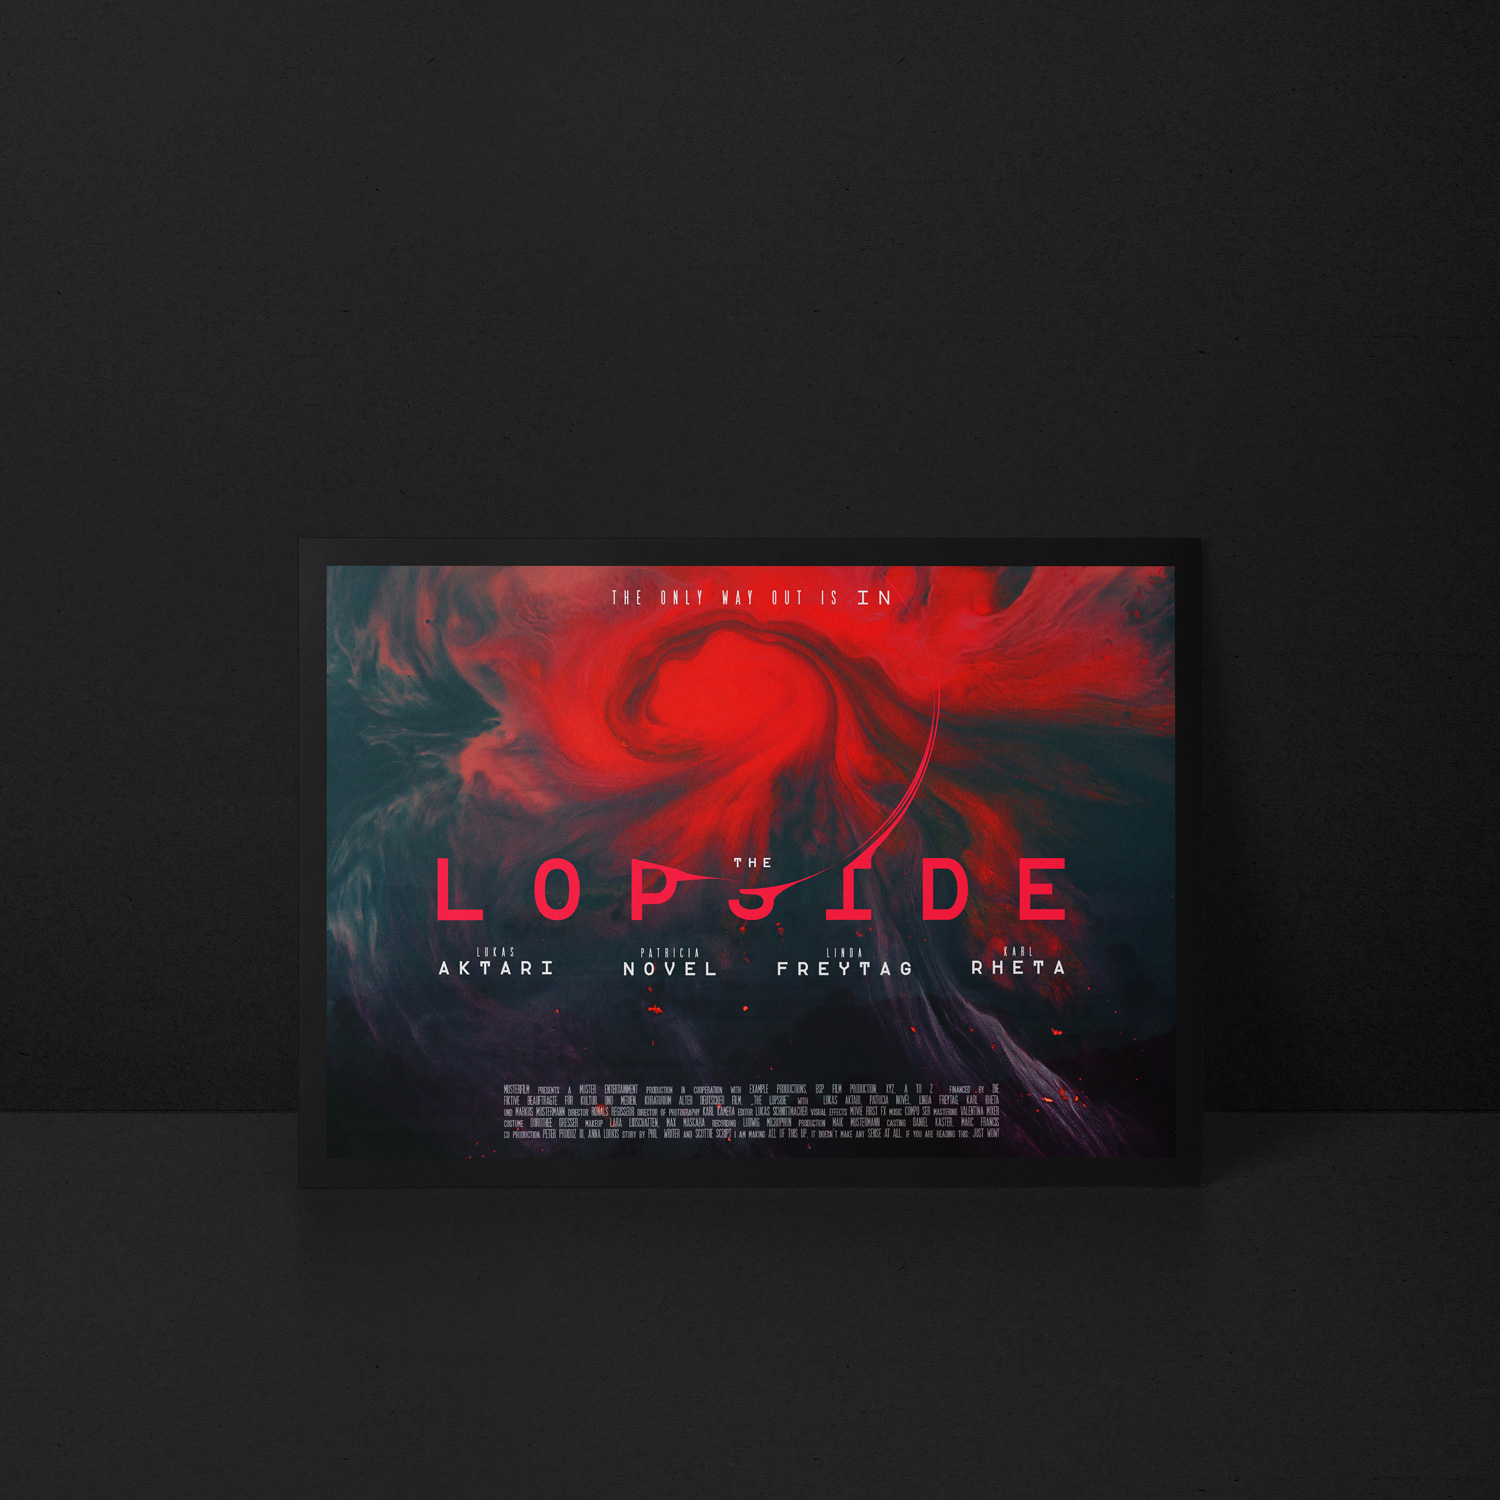 LOPSIDE Movie Poster designed by Tobias Heumann